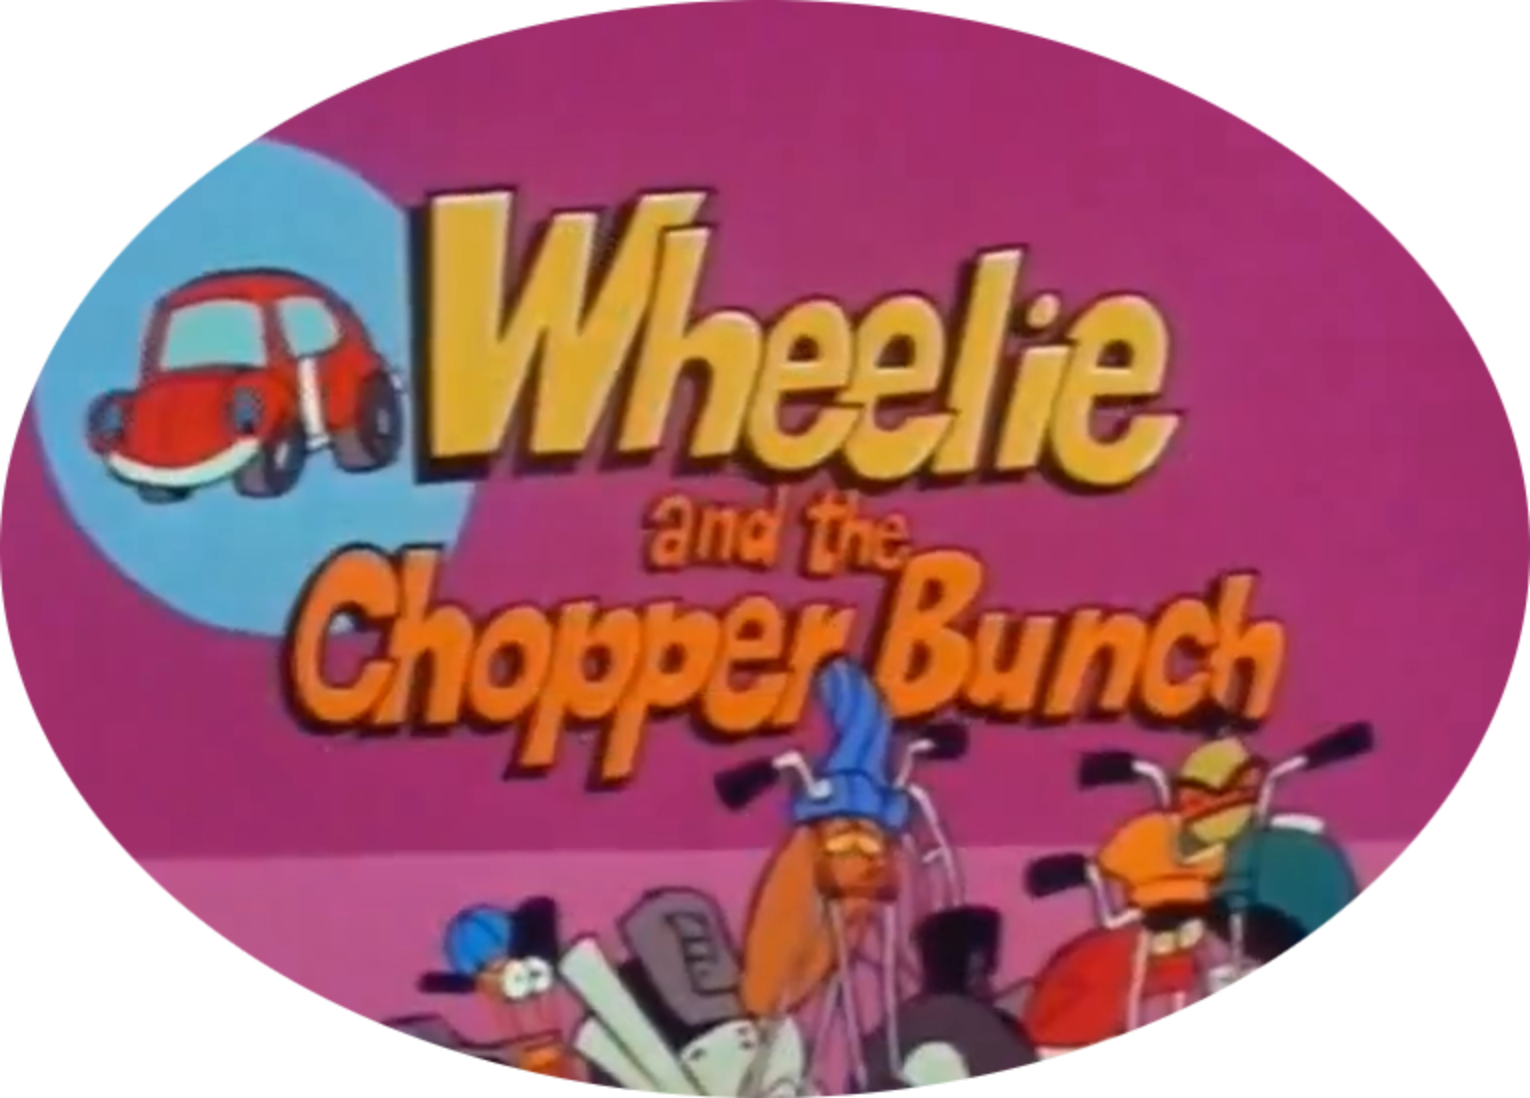 Wheelie and the Chopper Bunch Complete 